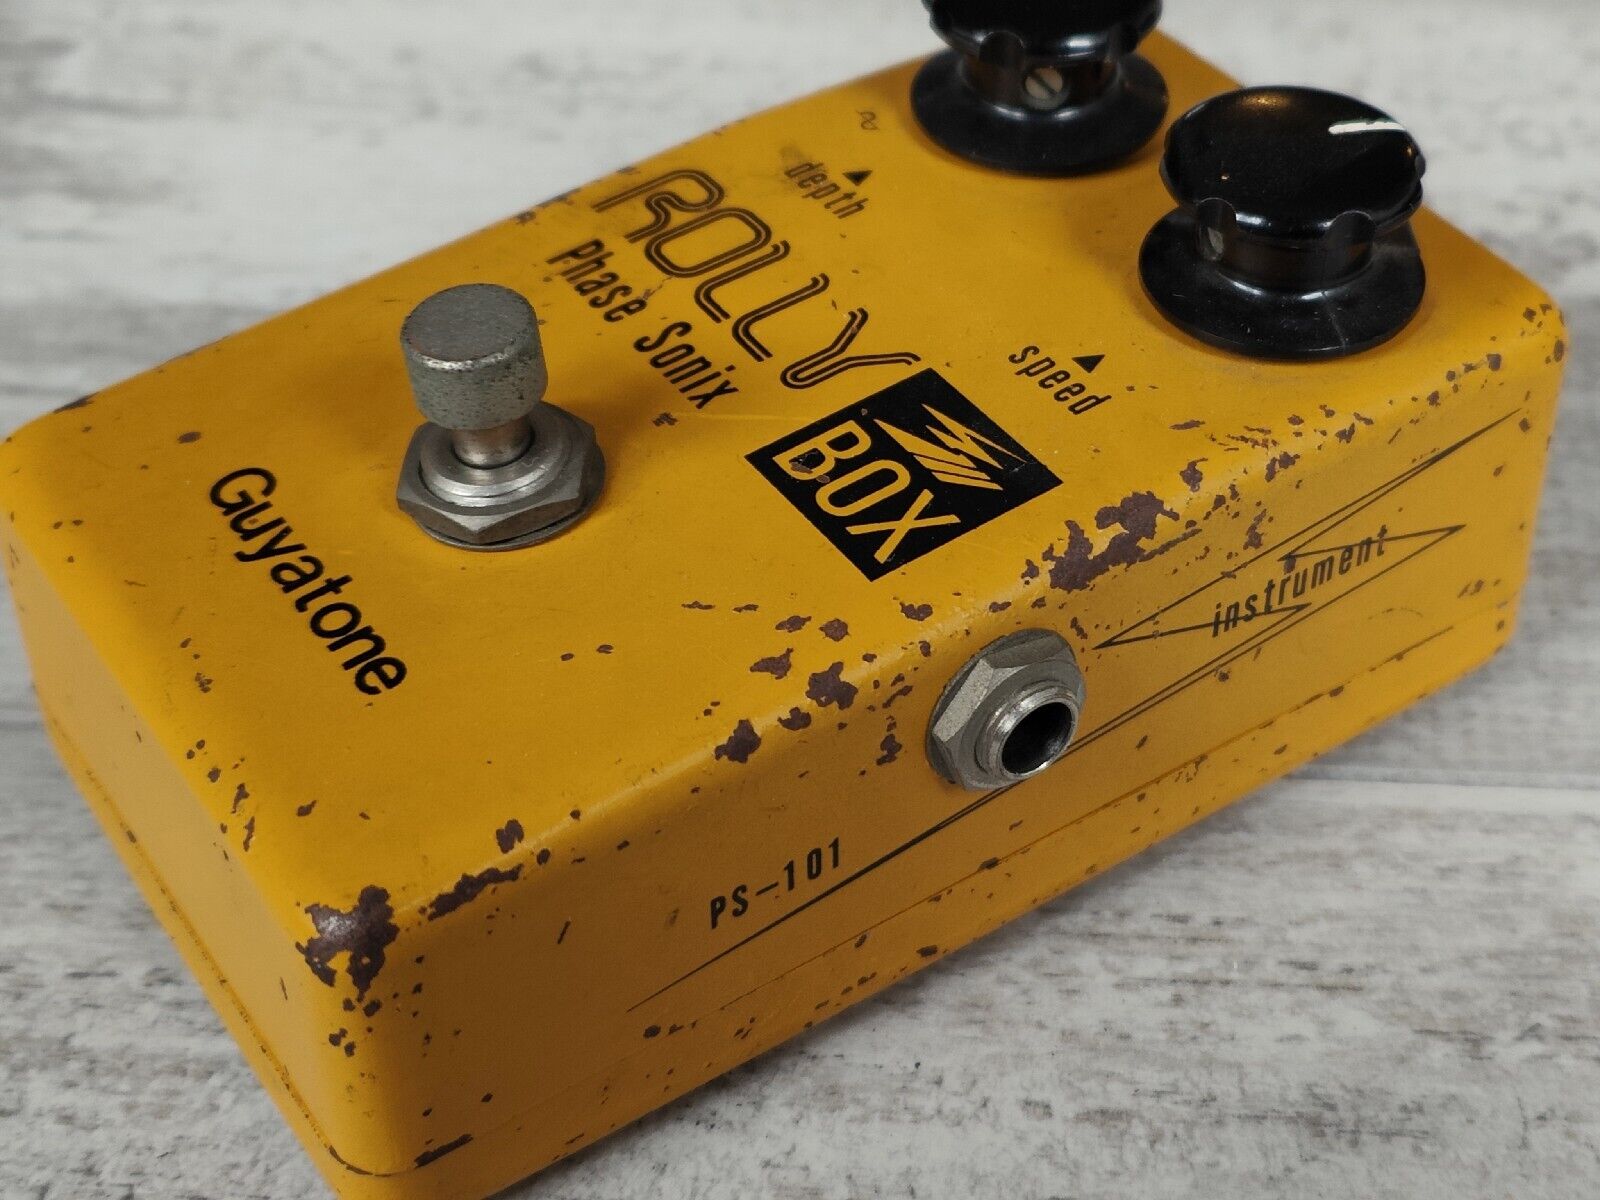 1977 Guyatone Japan "Rolly Box" Phase Sonix Phaser Pedal